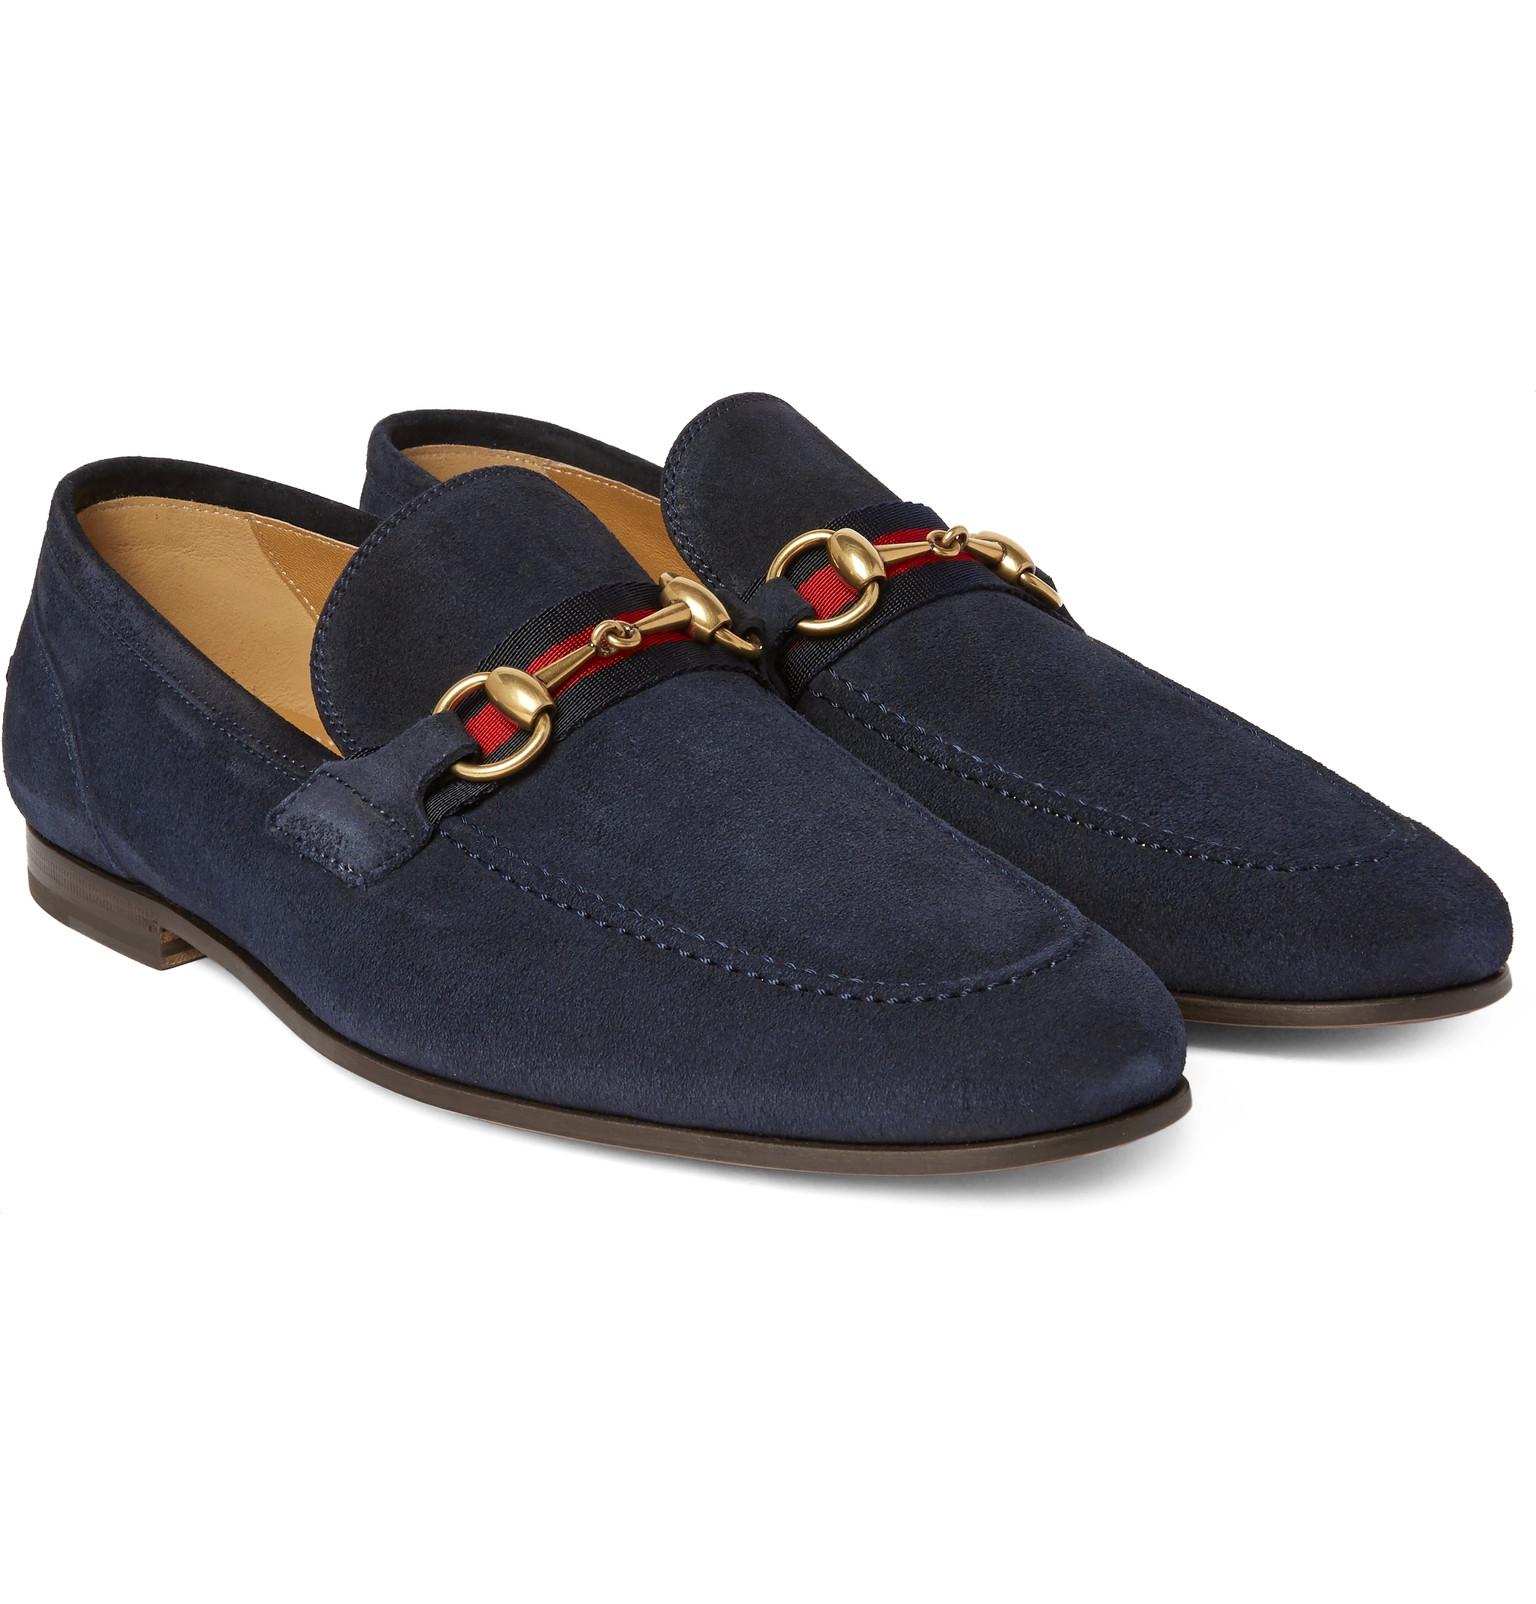 mens gucci suede loafers, OFF 78%,www 